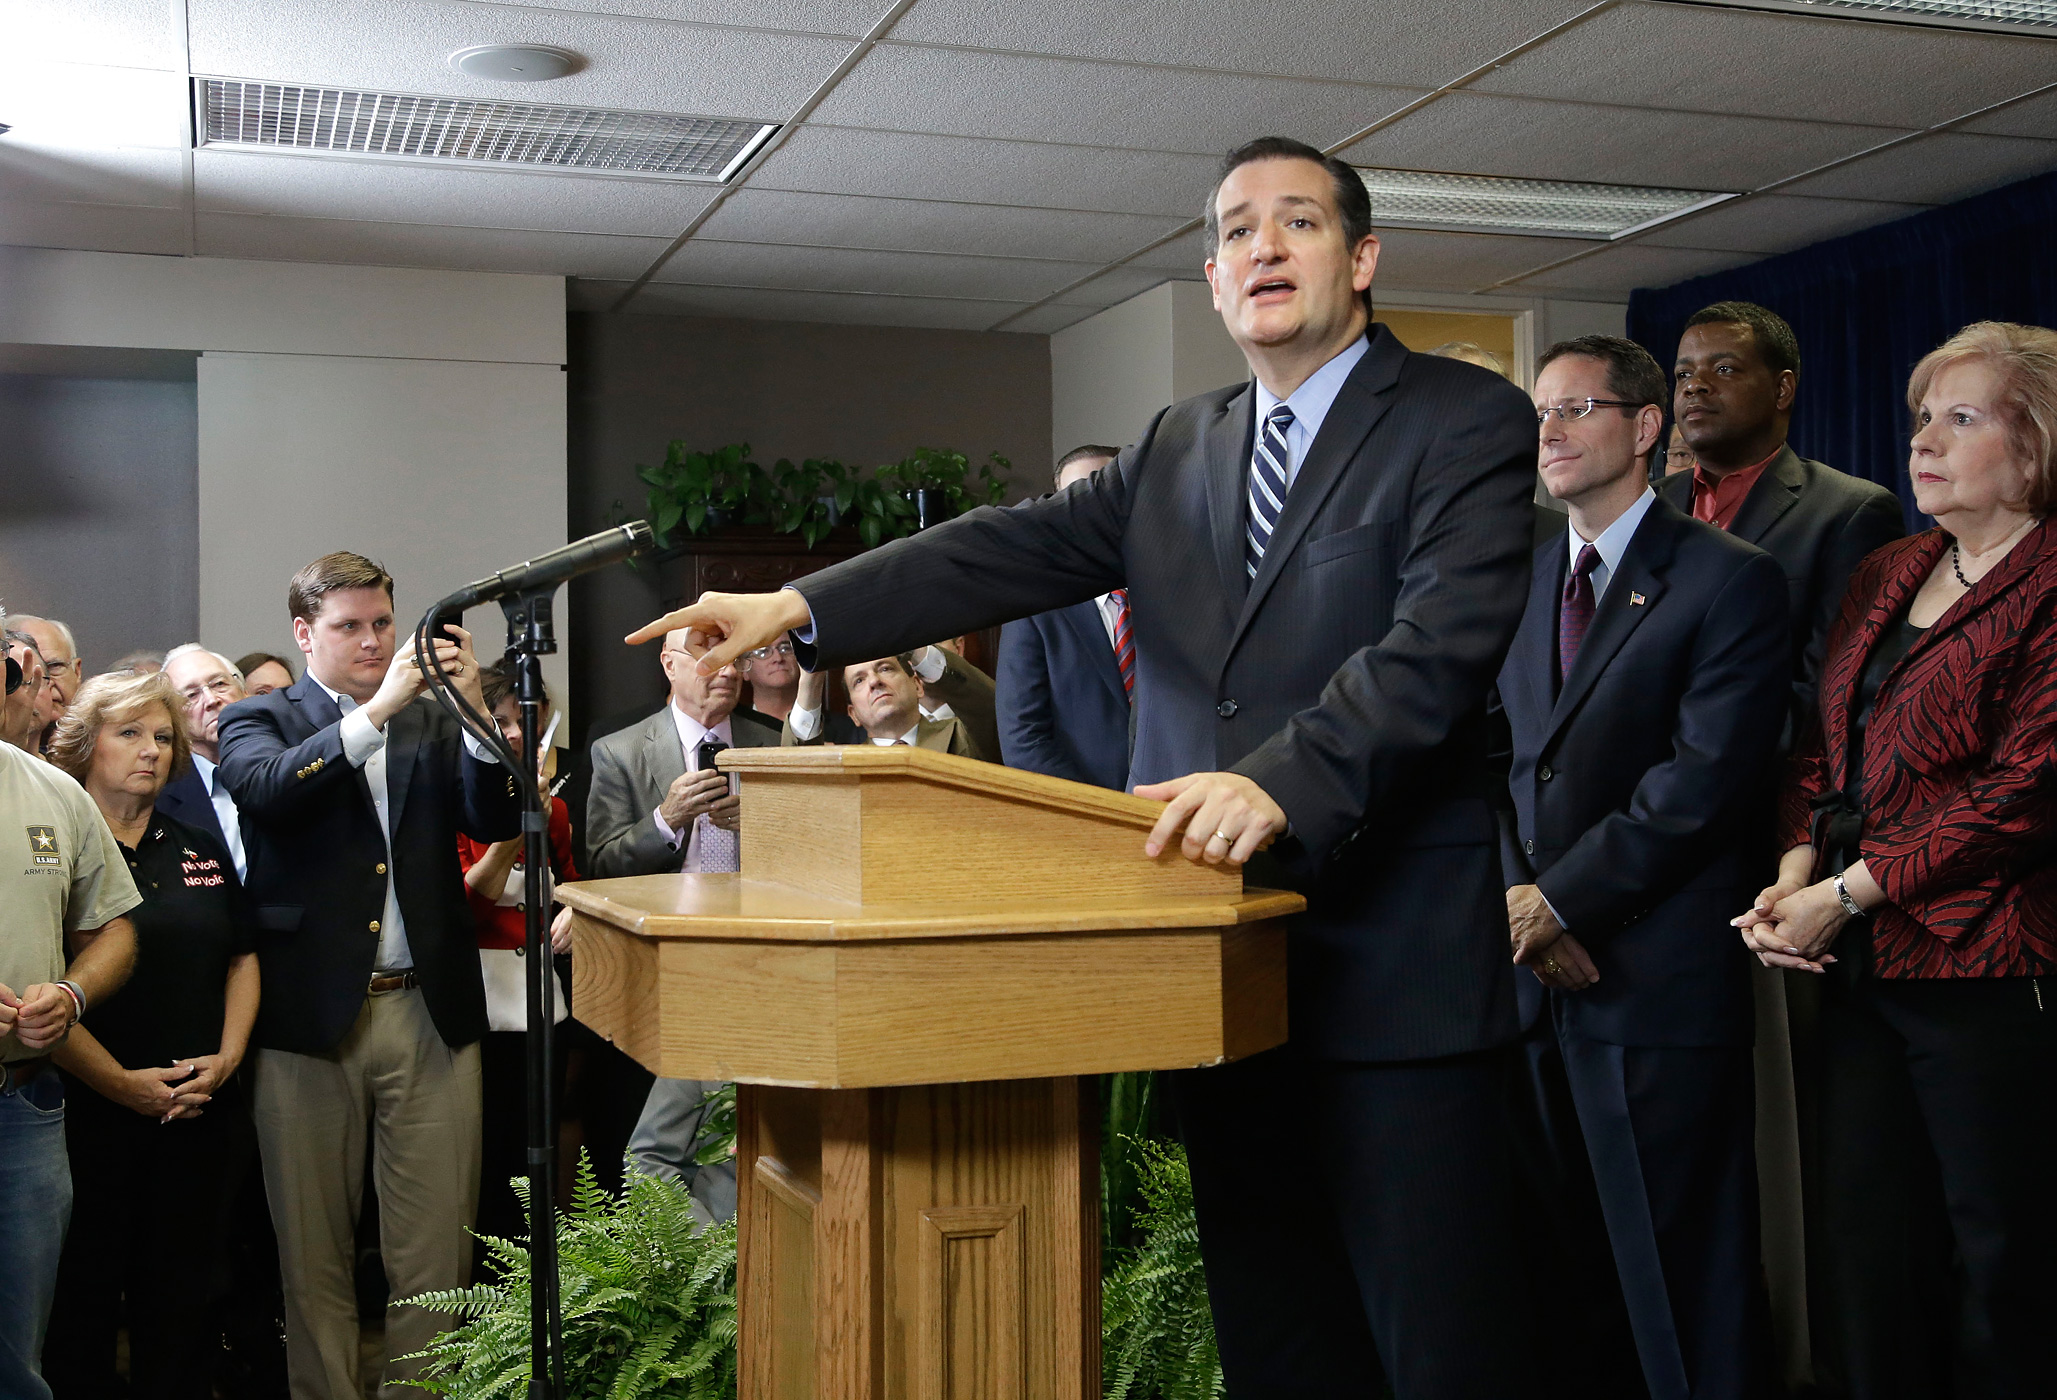 Sen. Ted Cruz is surrounded by preachers as he addresses a crowd at a Houston church Thursday, Oct. 16, 2014 about a legal dispute involving several pastors fighting subpoenas from Houston city attorneys. (Pat Sullivan—AP)